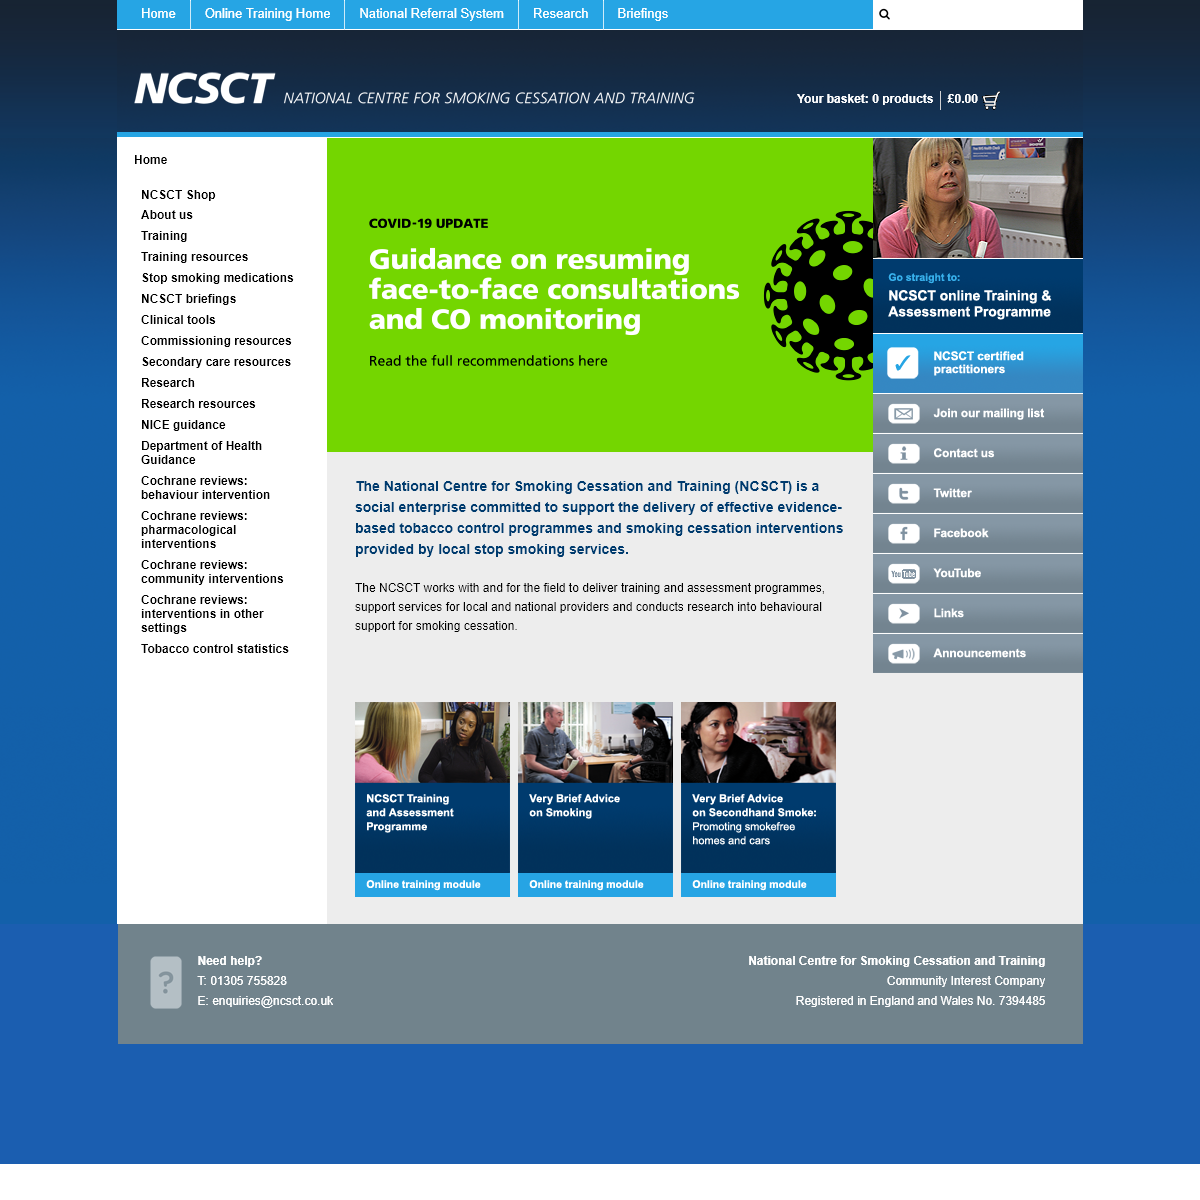 A complete backup of ncsct.co.uk